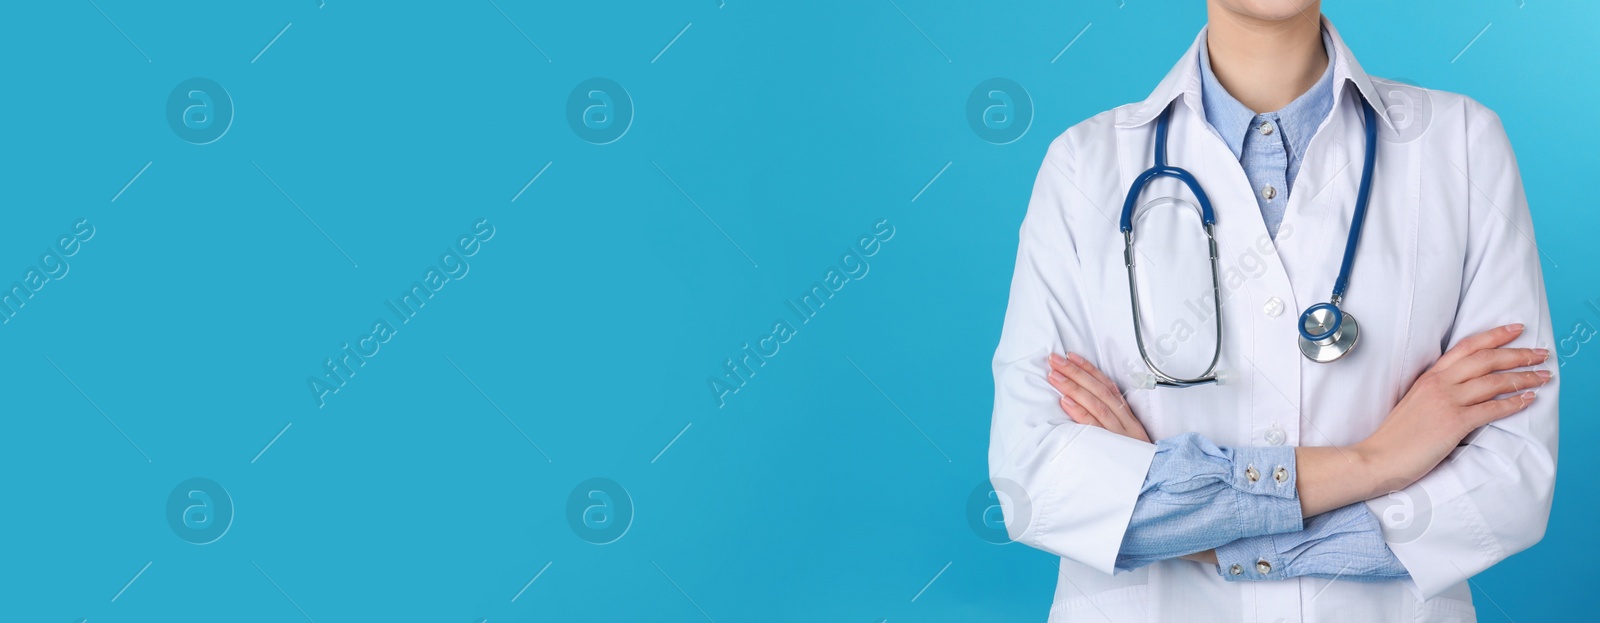 Image of Doctor with stethoscope on turquoise background, closeup view and space for text. Banner design